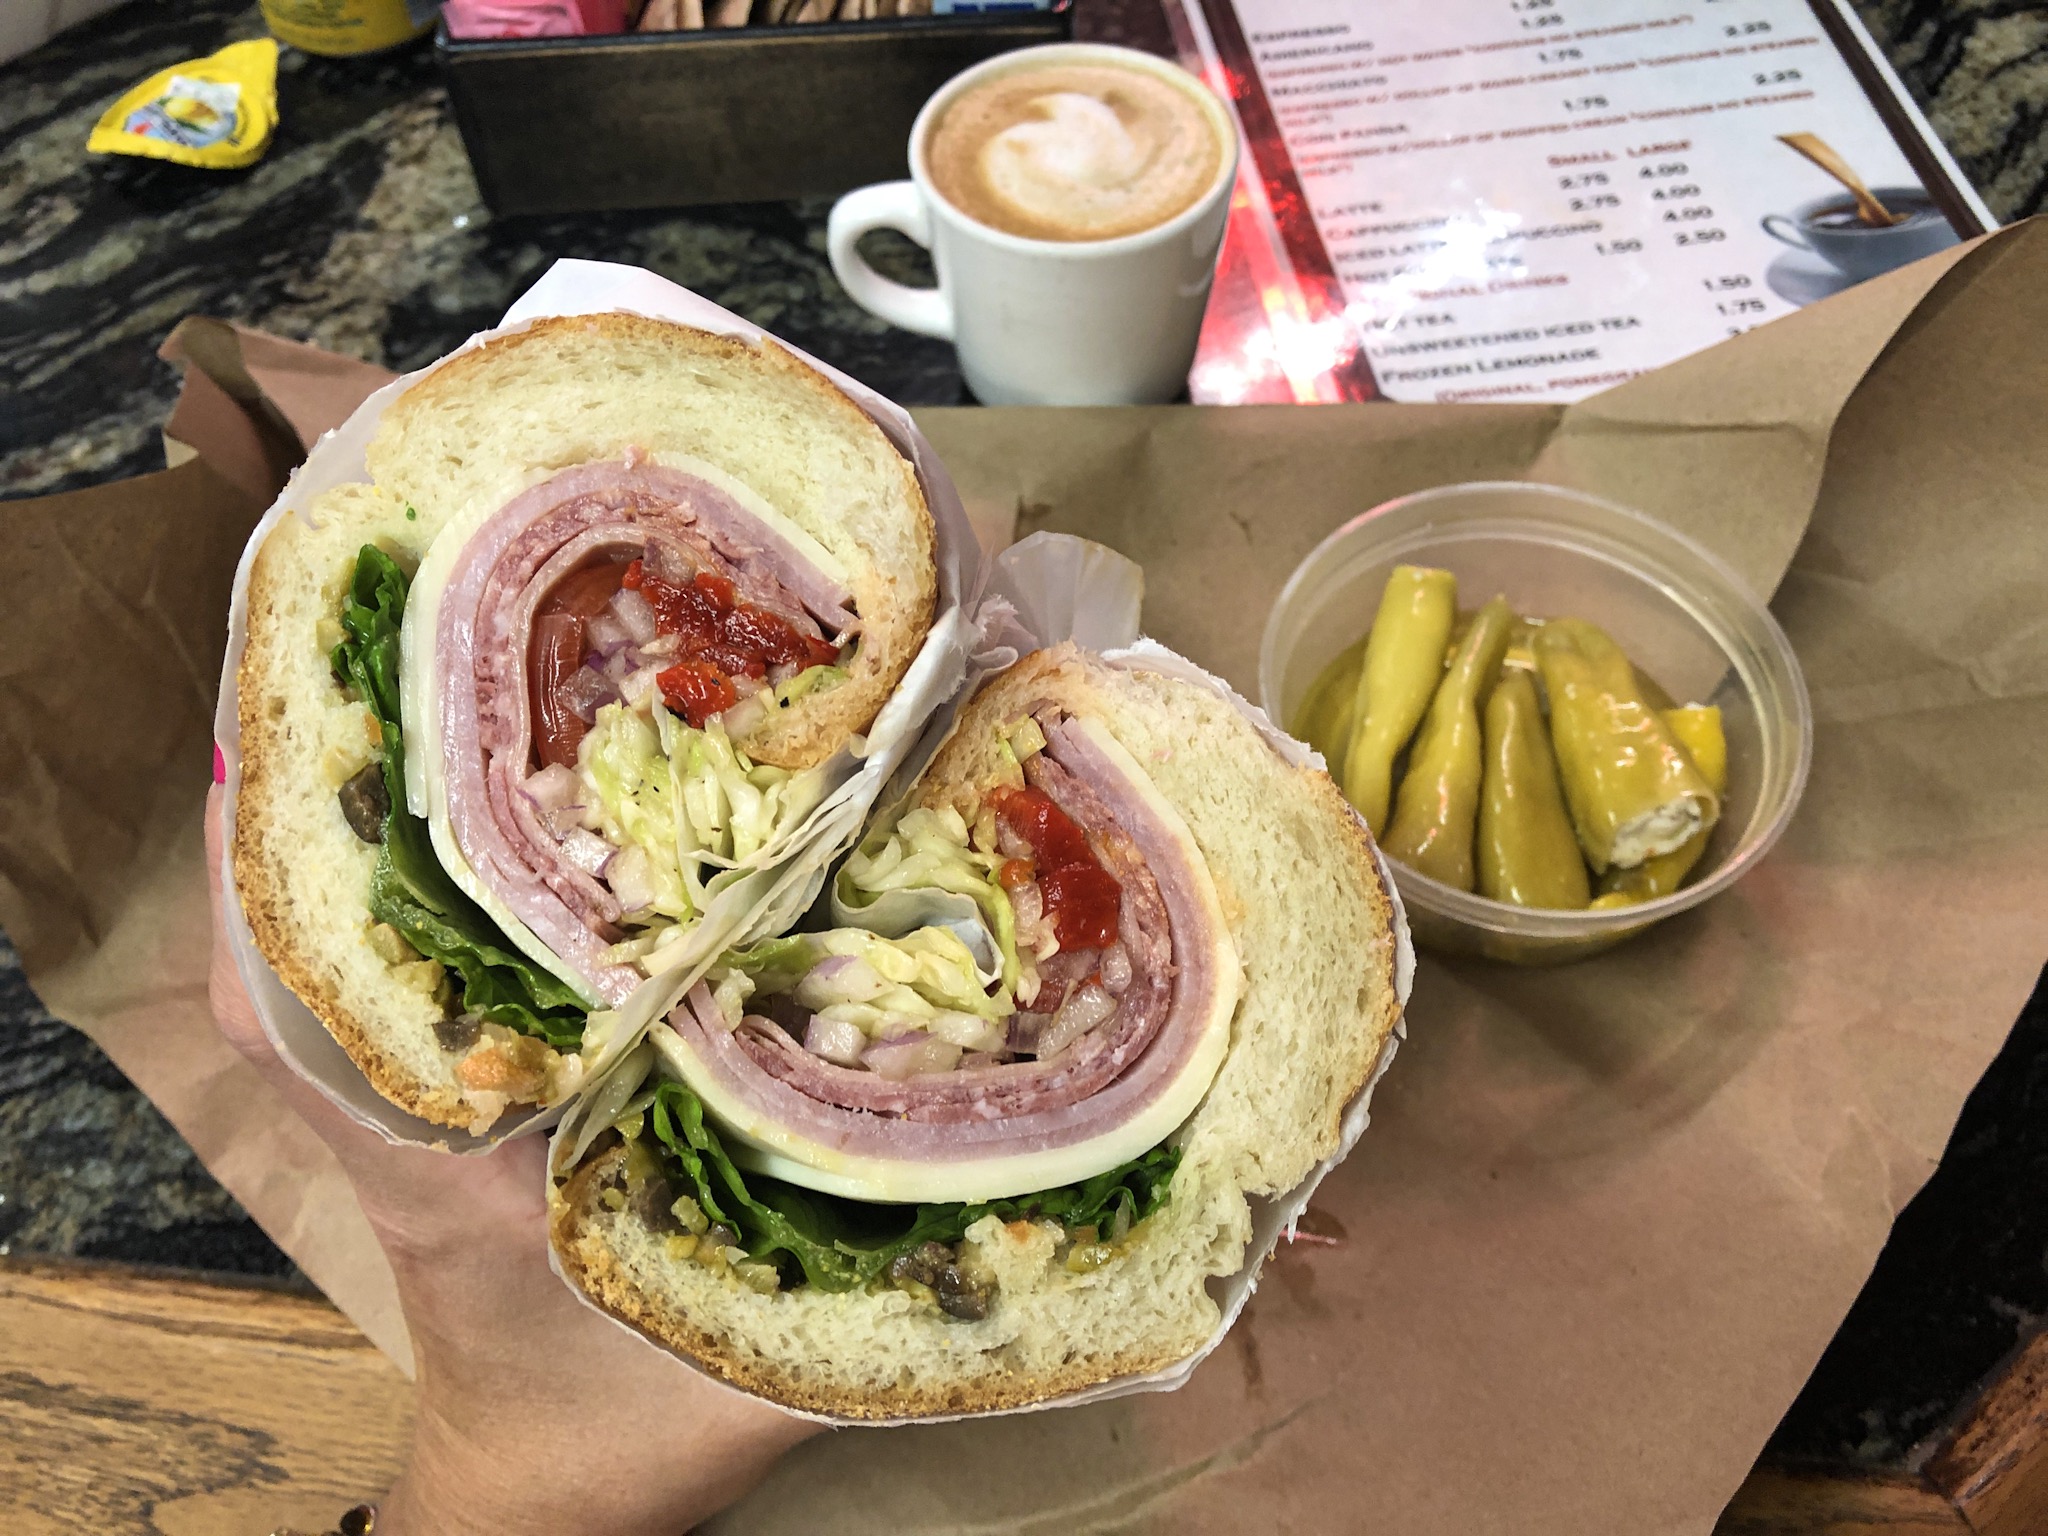 The Muffaletta from Mazzaro's with Ham, Mortadella, Salami, Provolone and Olives